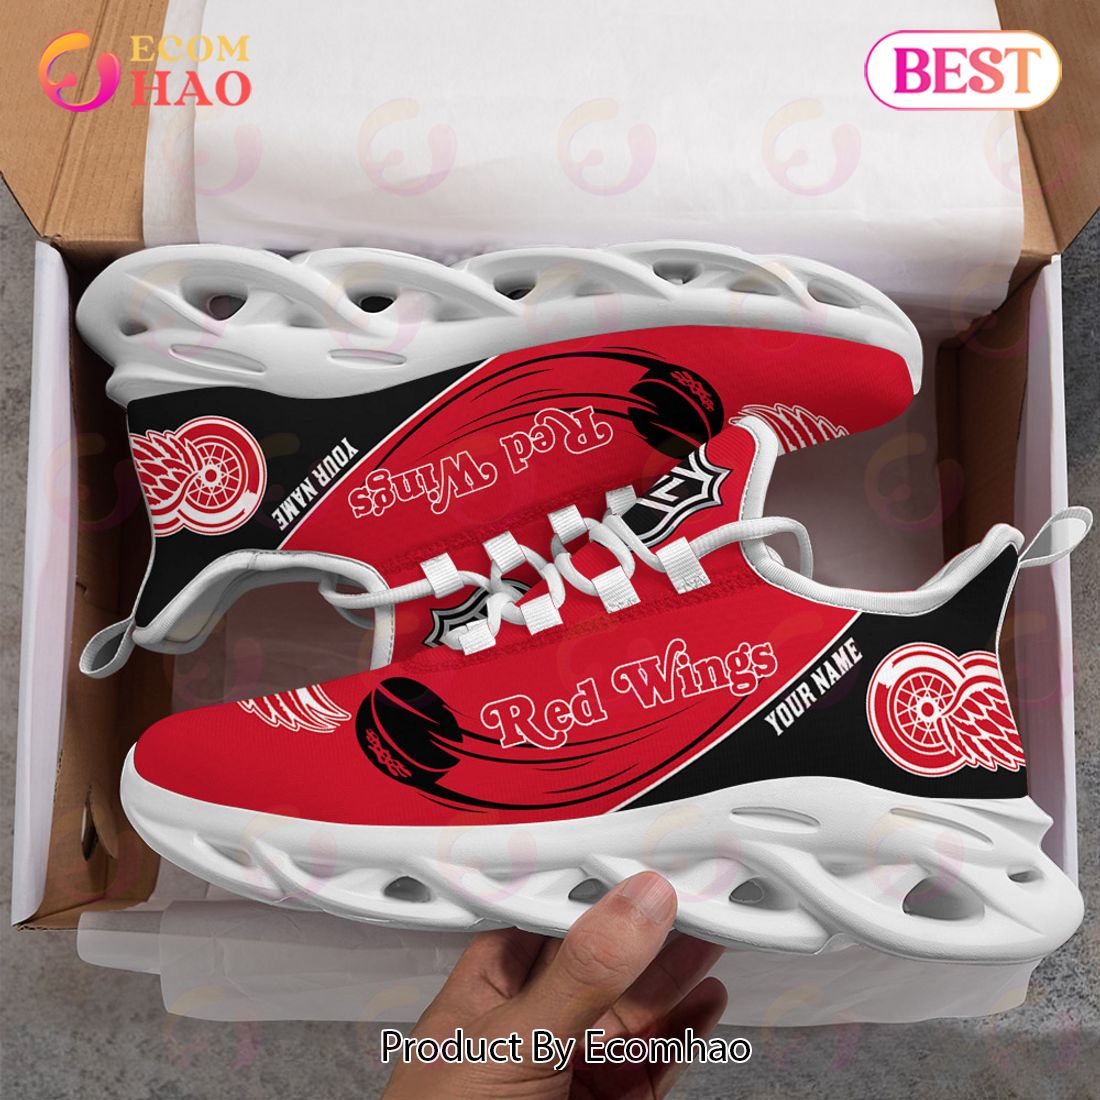 Custom Name NHL Detroit Red Wings Personalized Max Soul Shoes, Personalized  Sneakers - Banantees